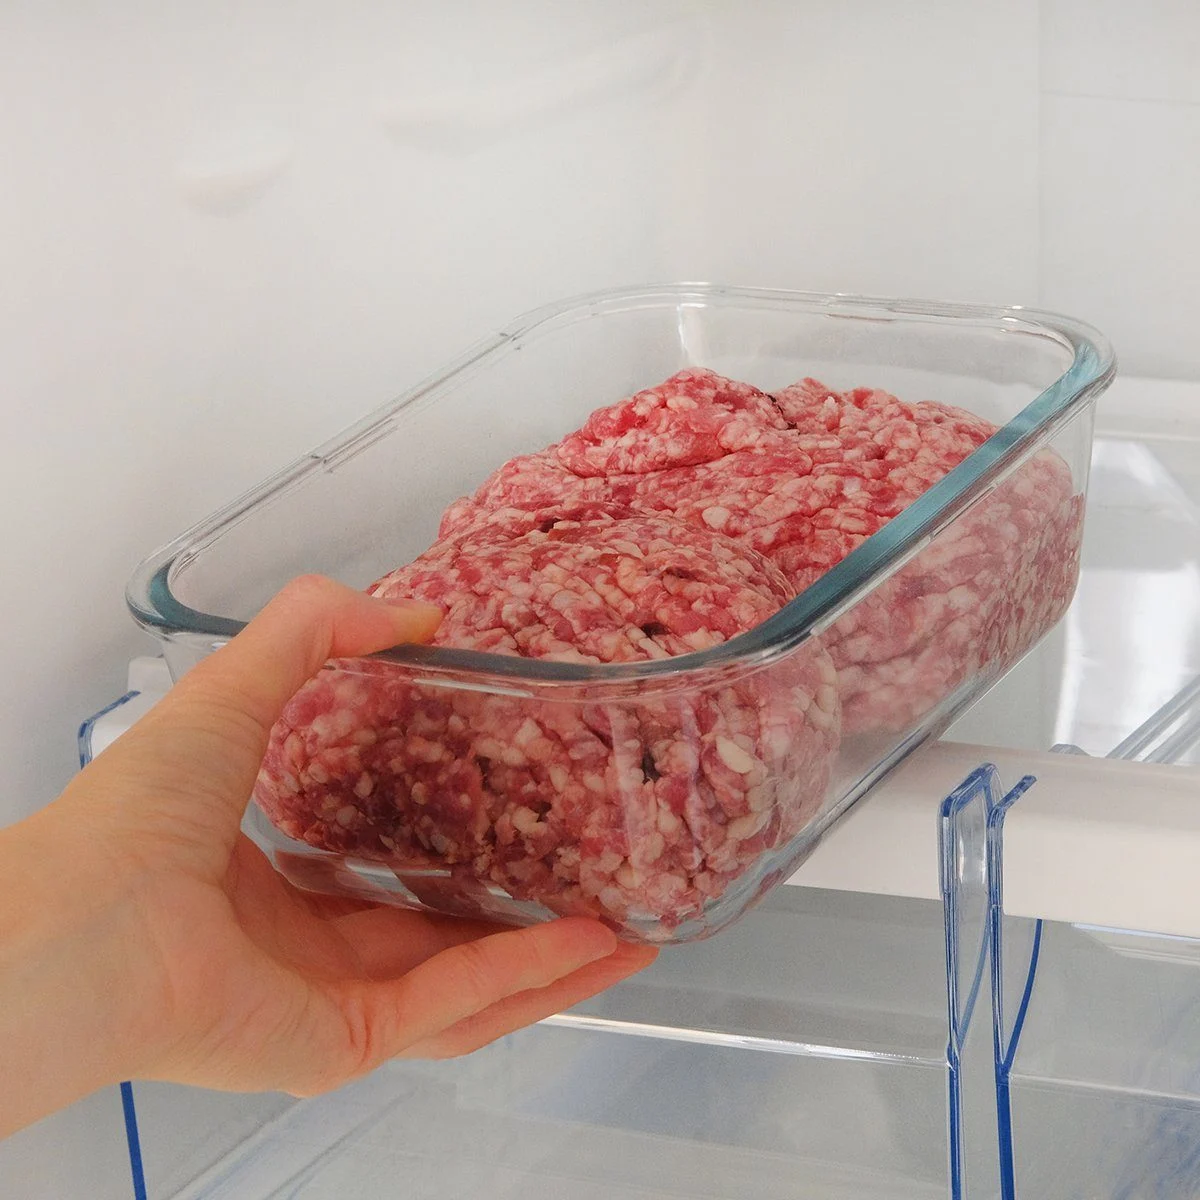 How To Store Opened Ground Beef